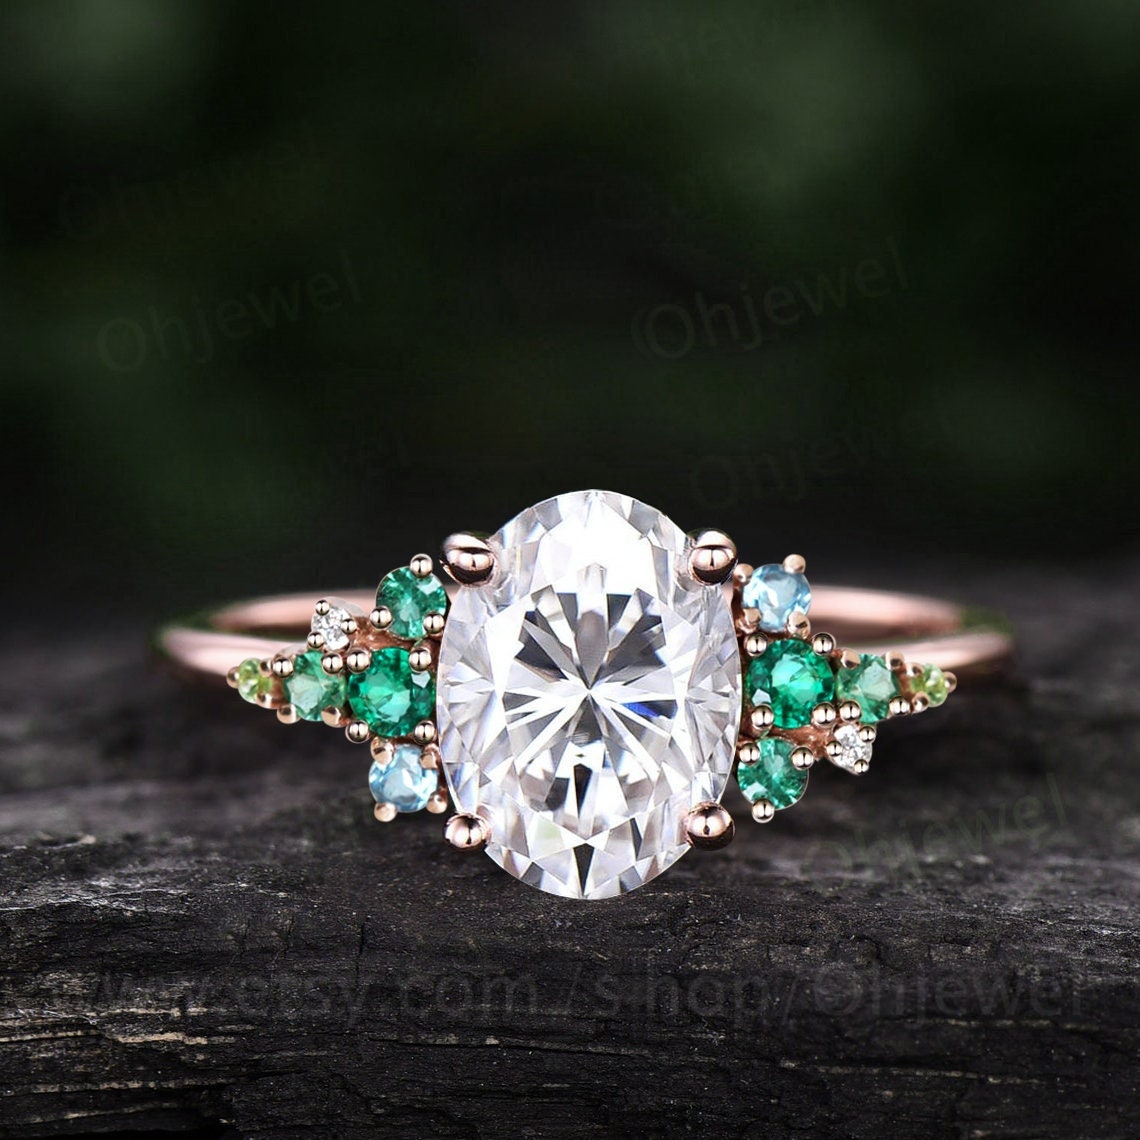 Vintage 2ct oval moissanite engagement ring cluster snowdrift peridot emerald ring women solid 14k rose gold unique bridal promise ring her